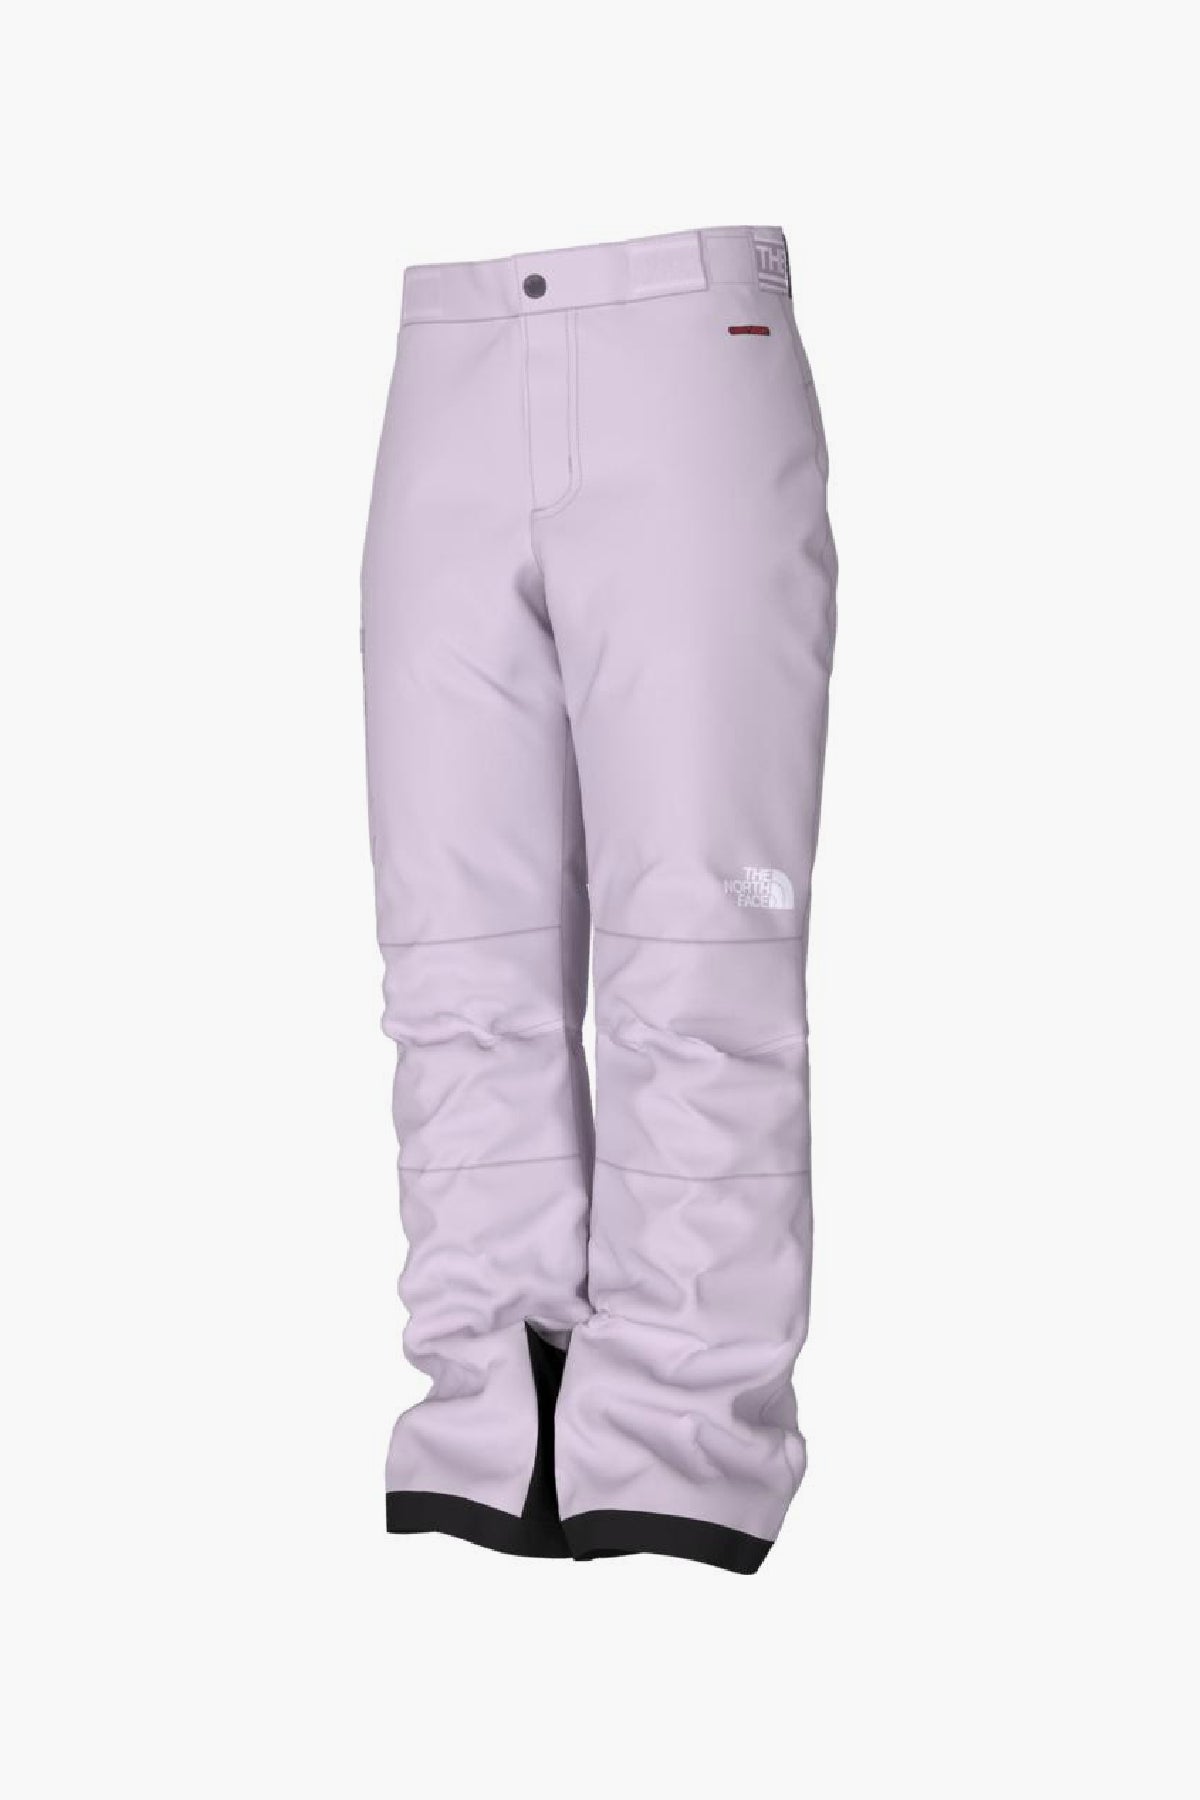 THE NORTH FACE GIRLS FREEDOM INSULATED SNOW PANT LAVENDER FOG 2023